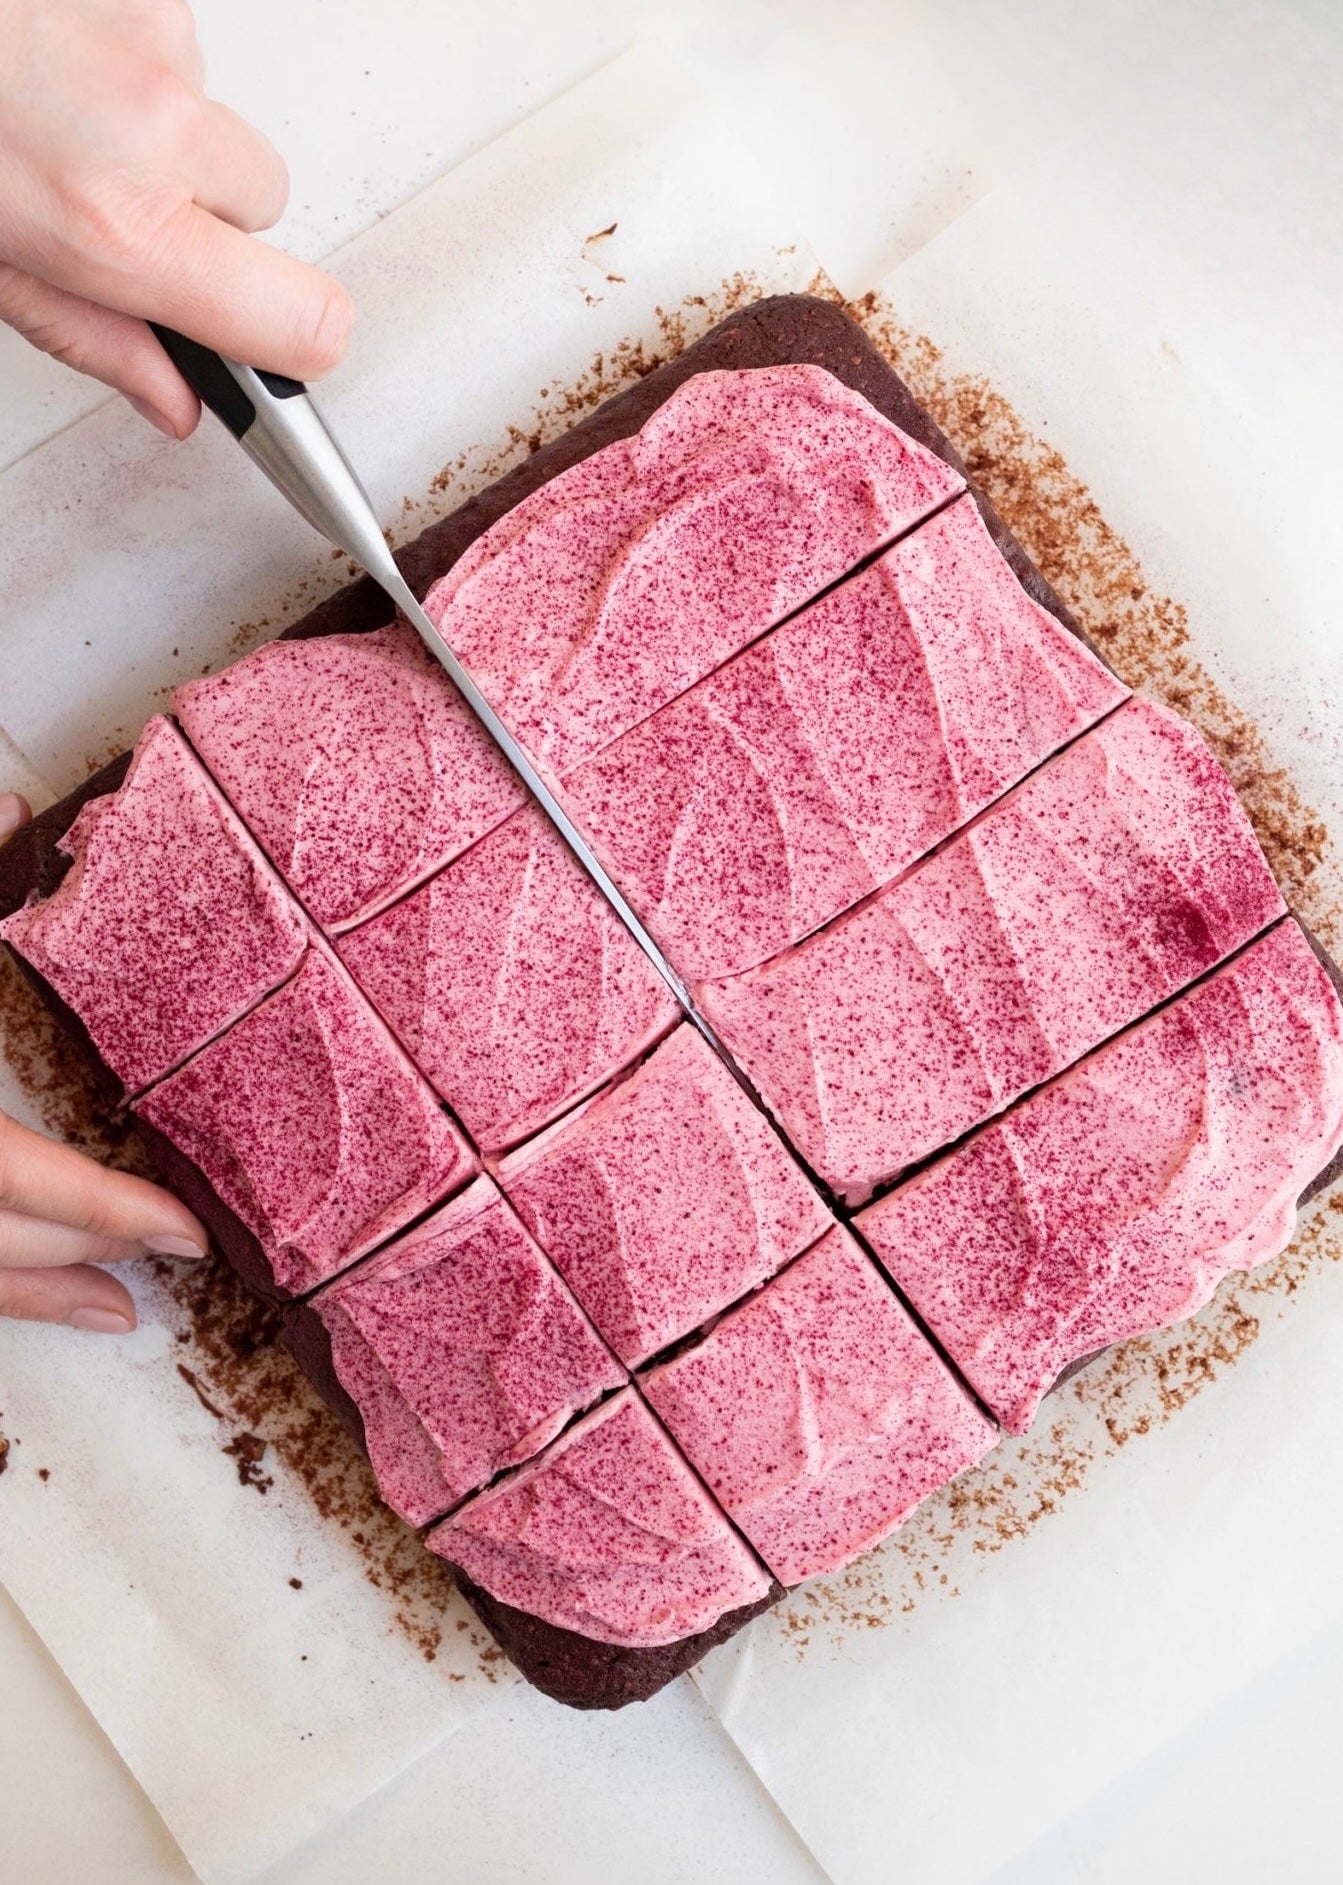 HeartBeet Brownies With Pink Frosting